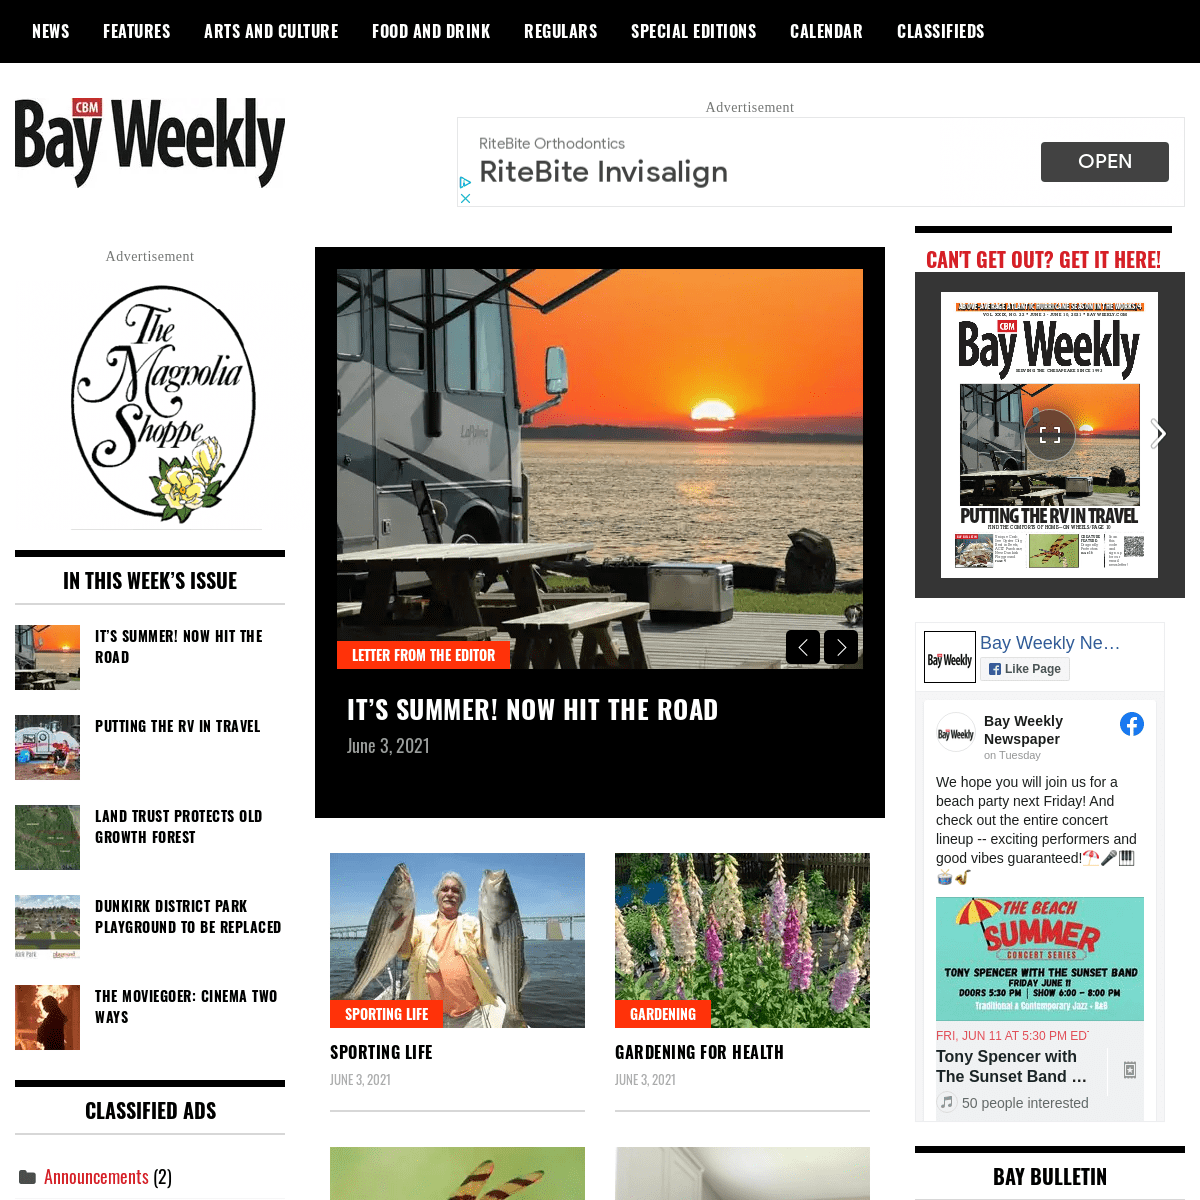 A complete backup of https://bayweekly.com